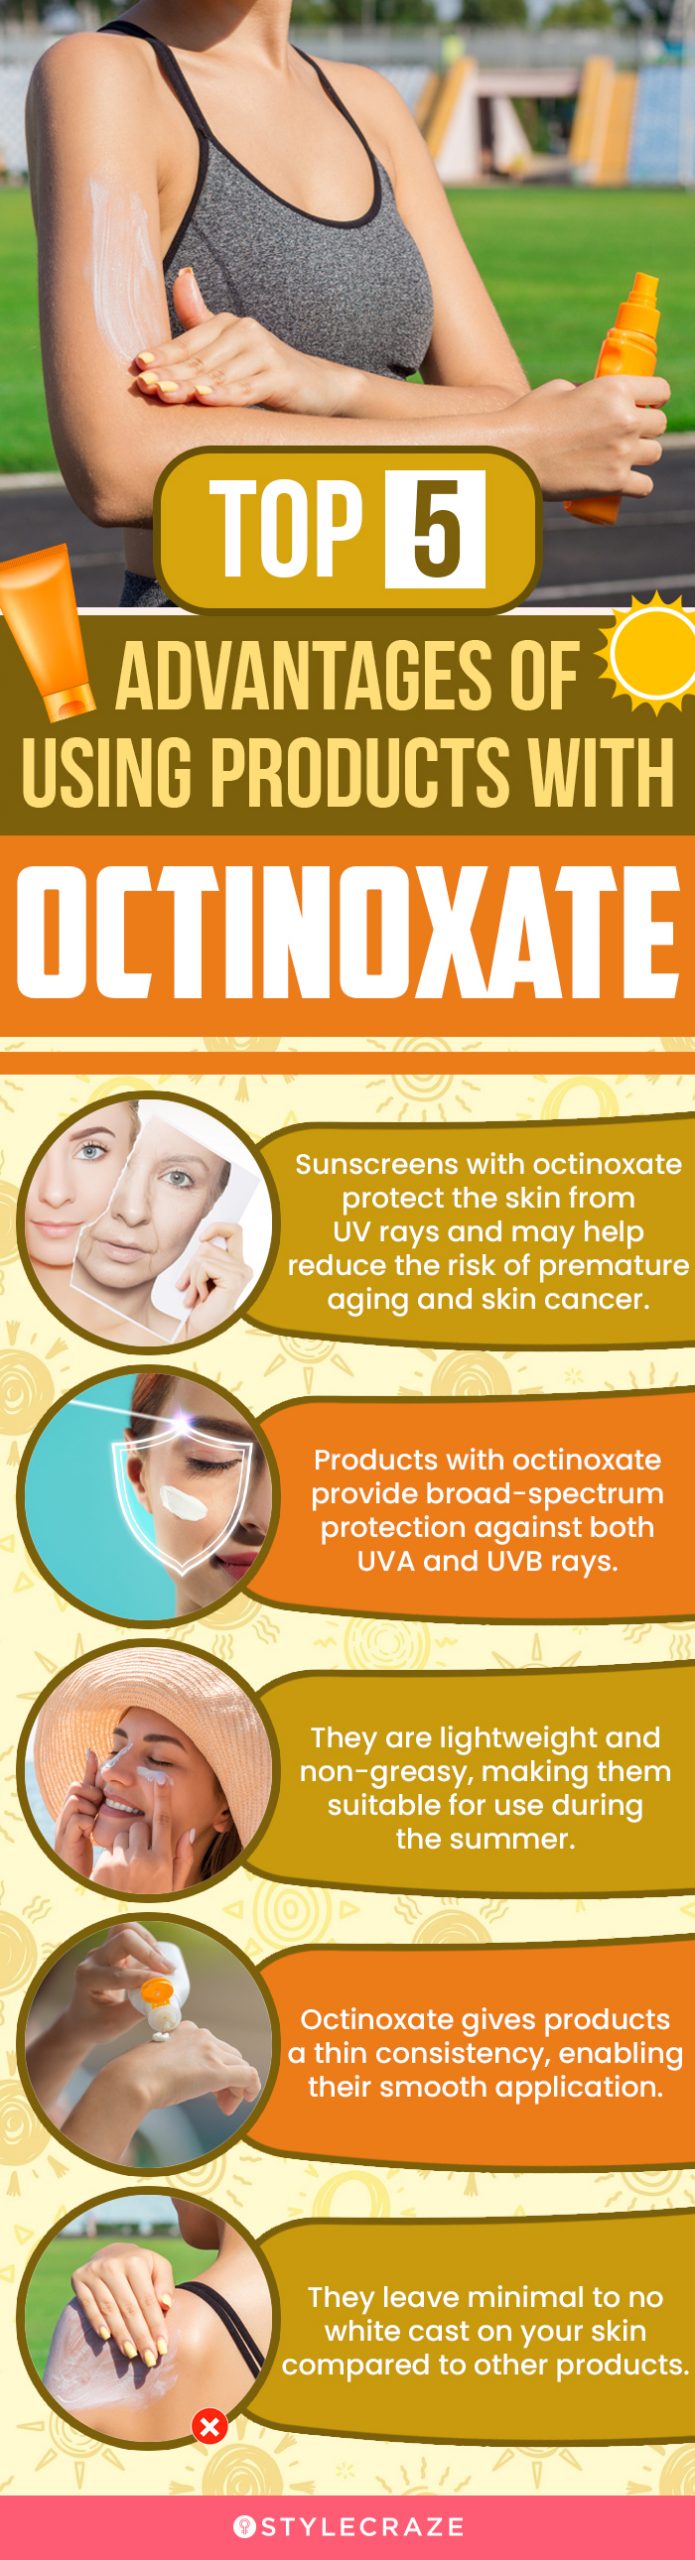 top 5 advantages of using products with octinoxate (infographic)